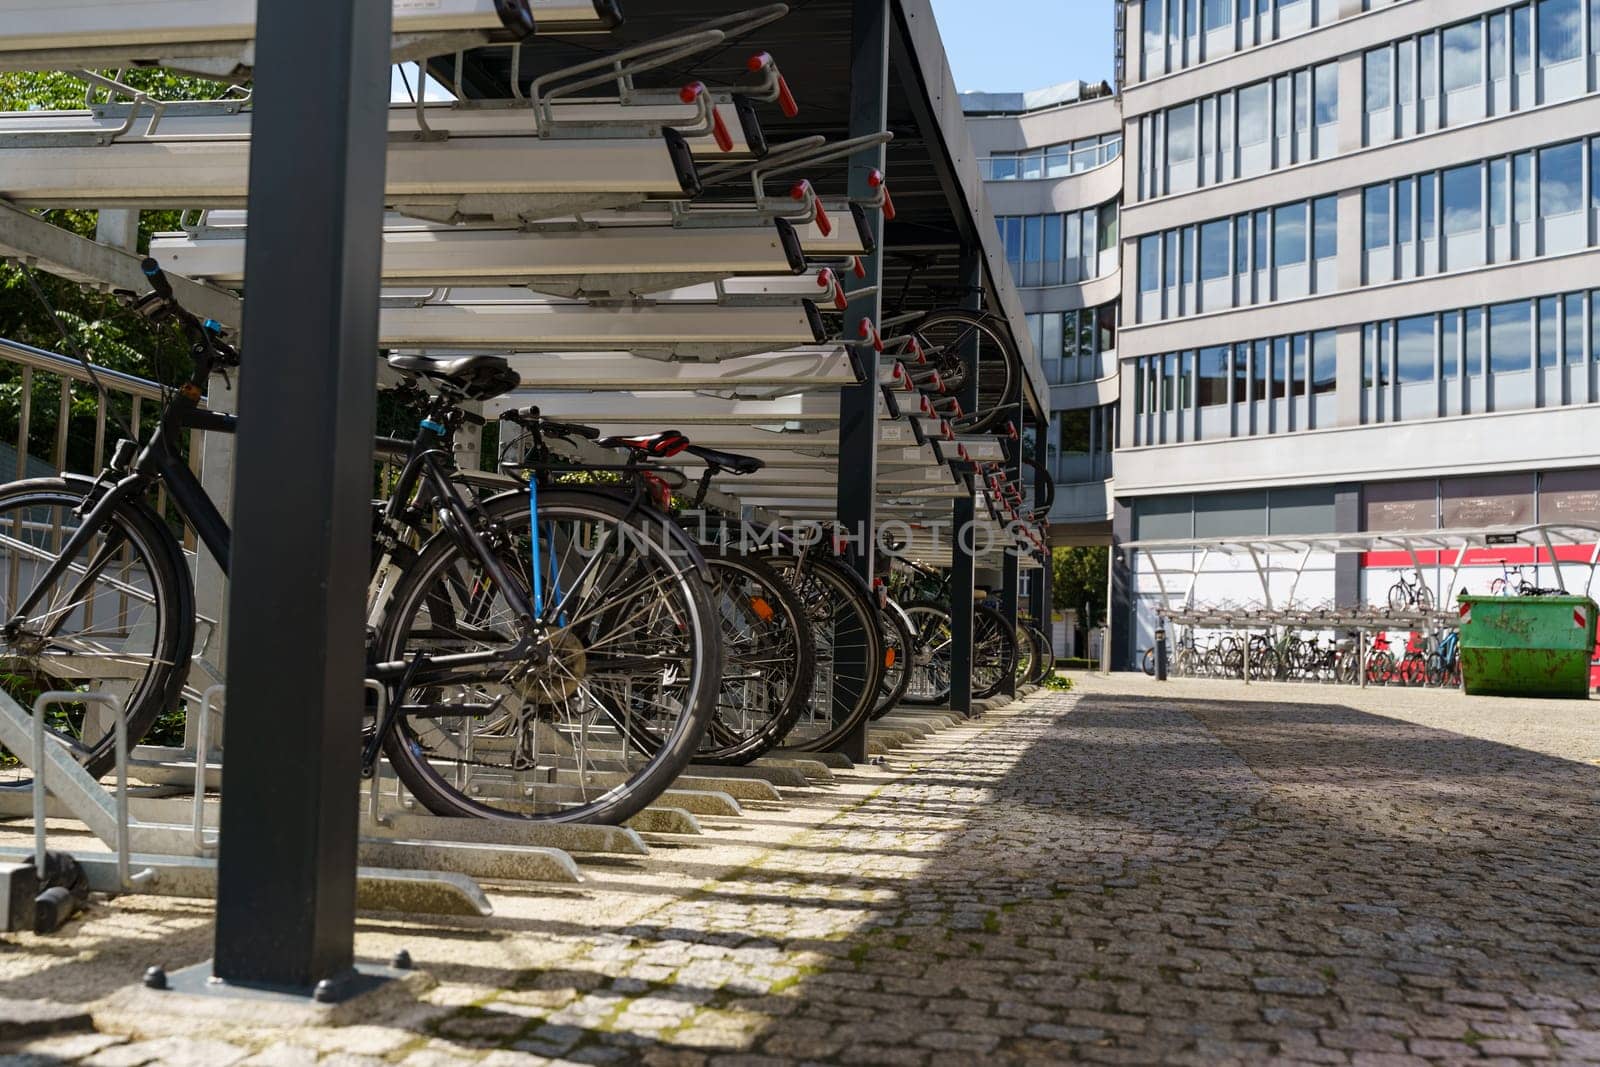 Multiple bicycles neatly parked in rows in front of a building, with various colors and designs visible.